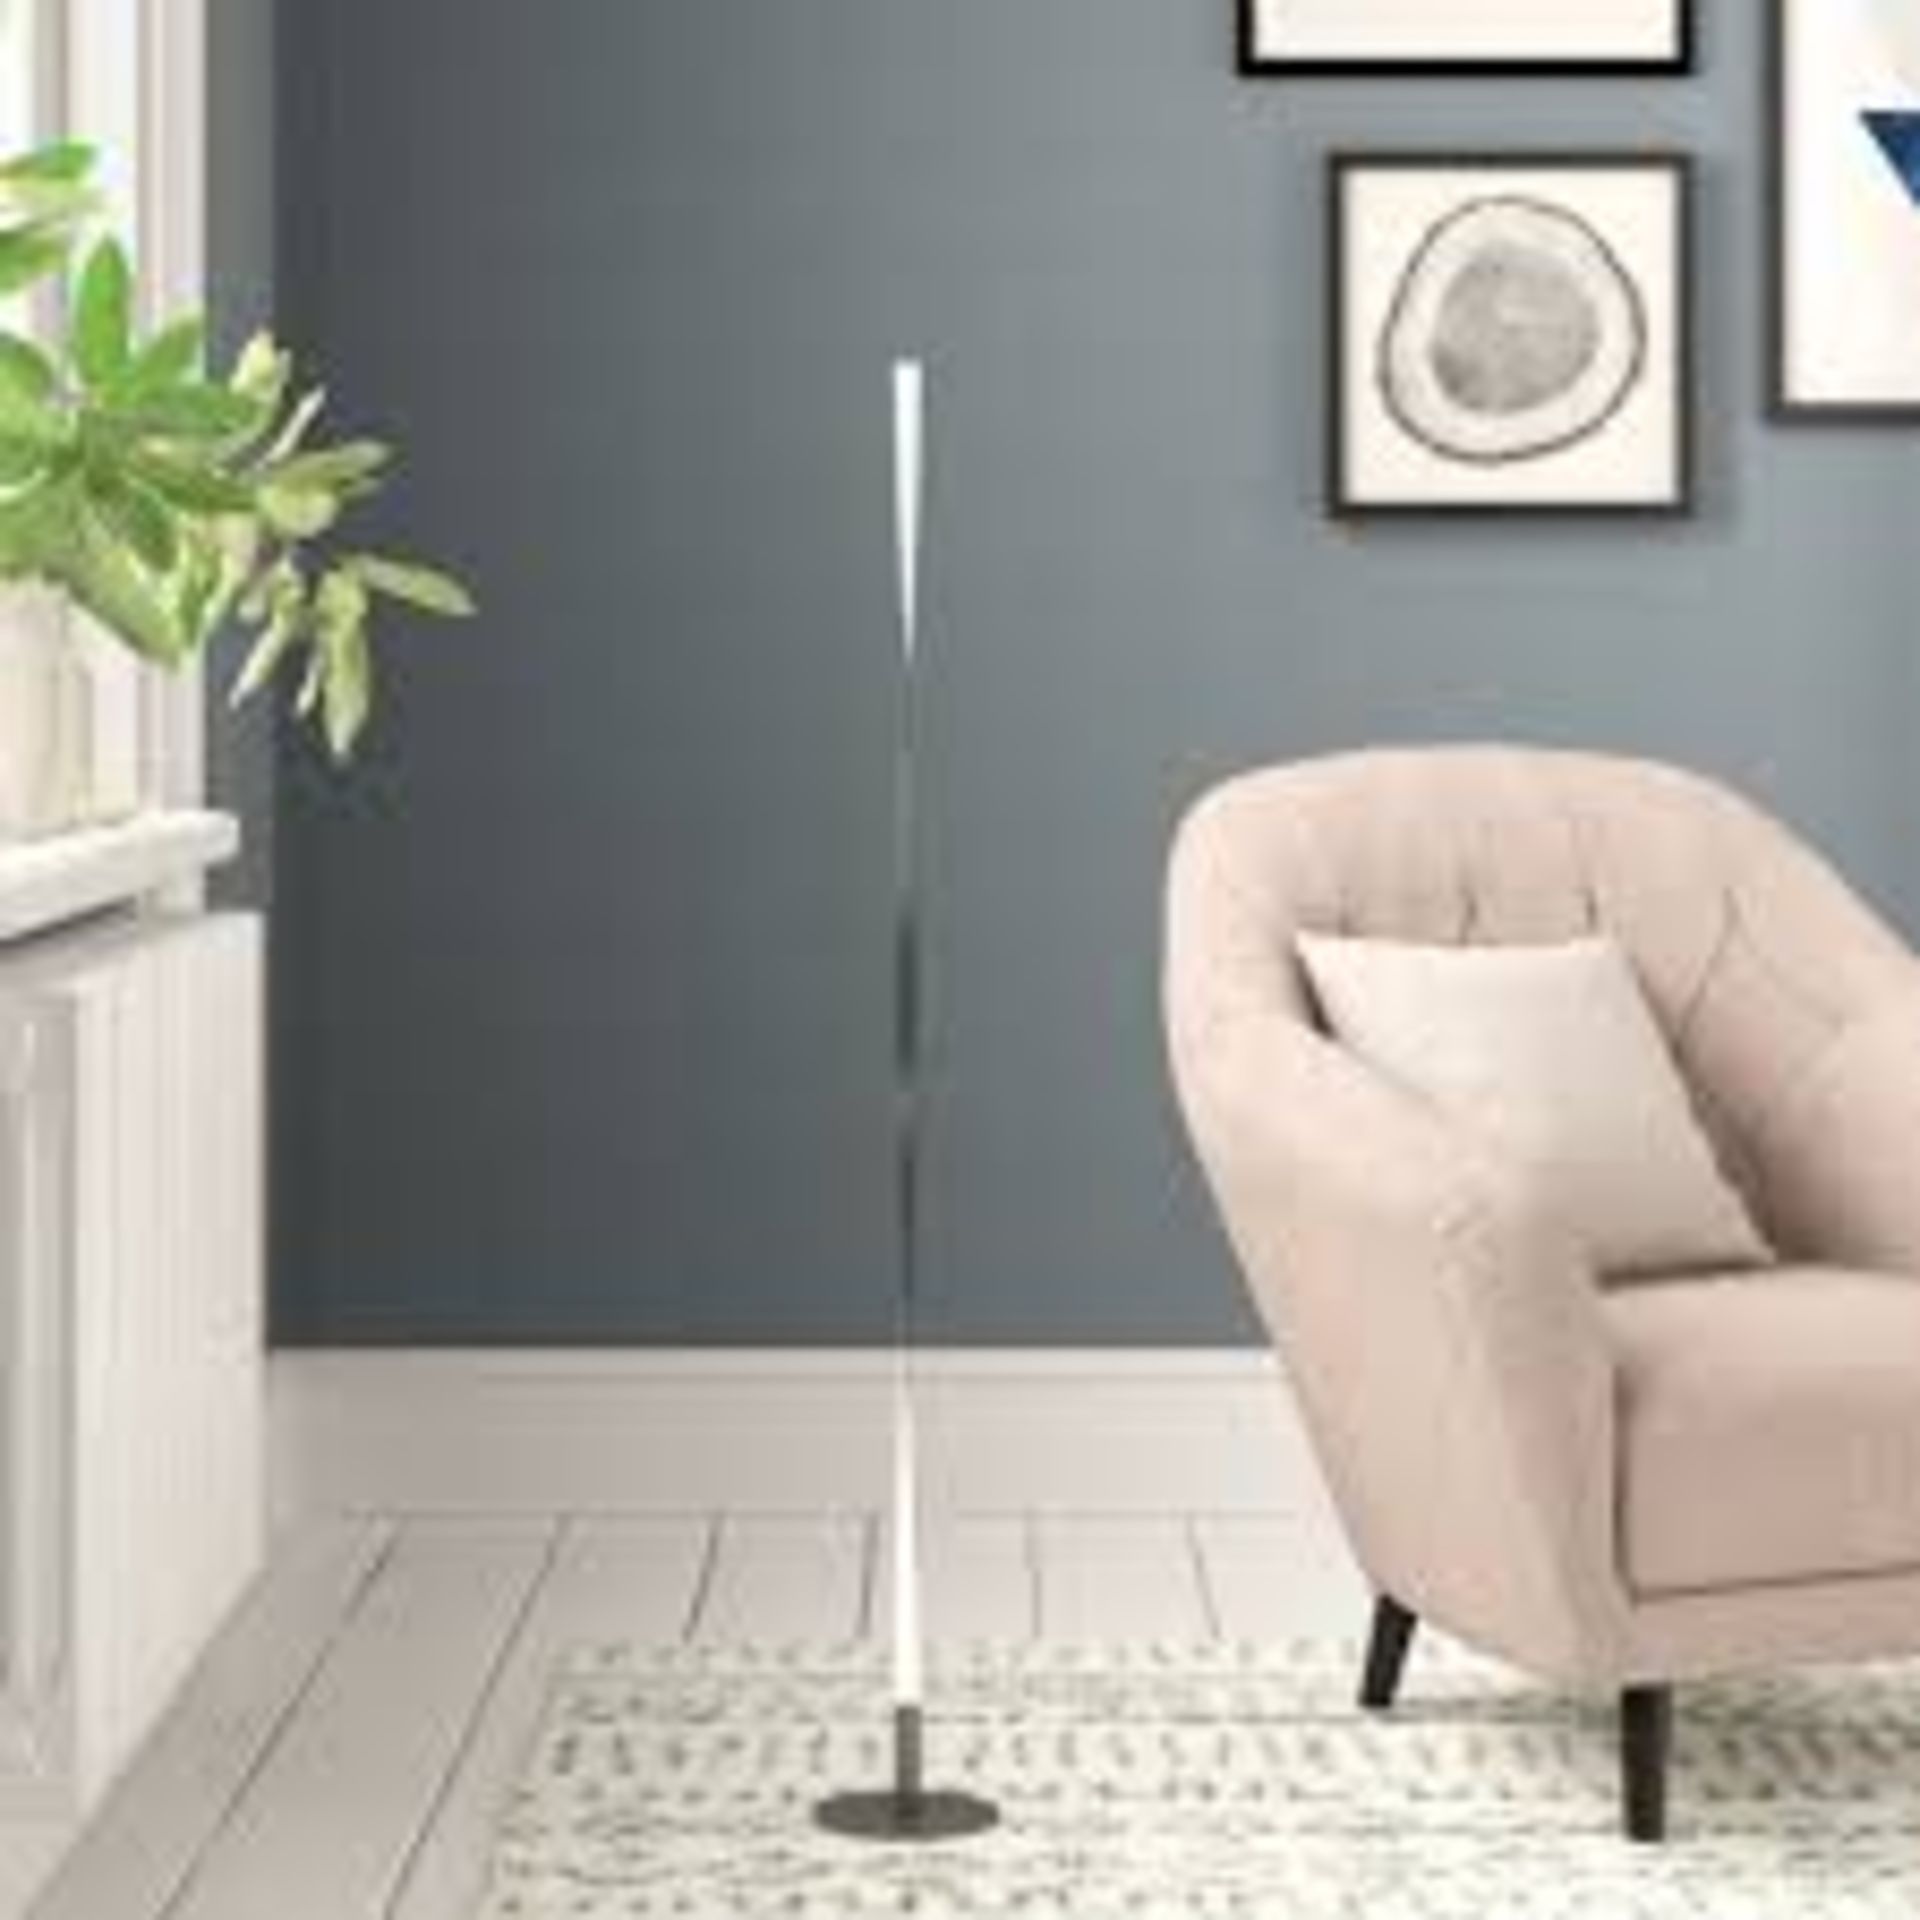 Boxed LED Twist 120 cm Floor Lamp RRP £60 (15651) (UNTESTED CUSTOMER RETURNS)(APPRAISALS AVAILABLE